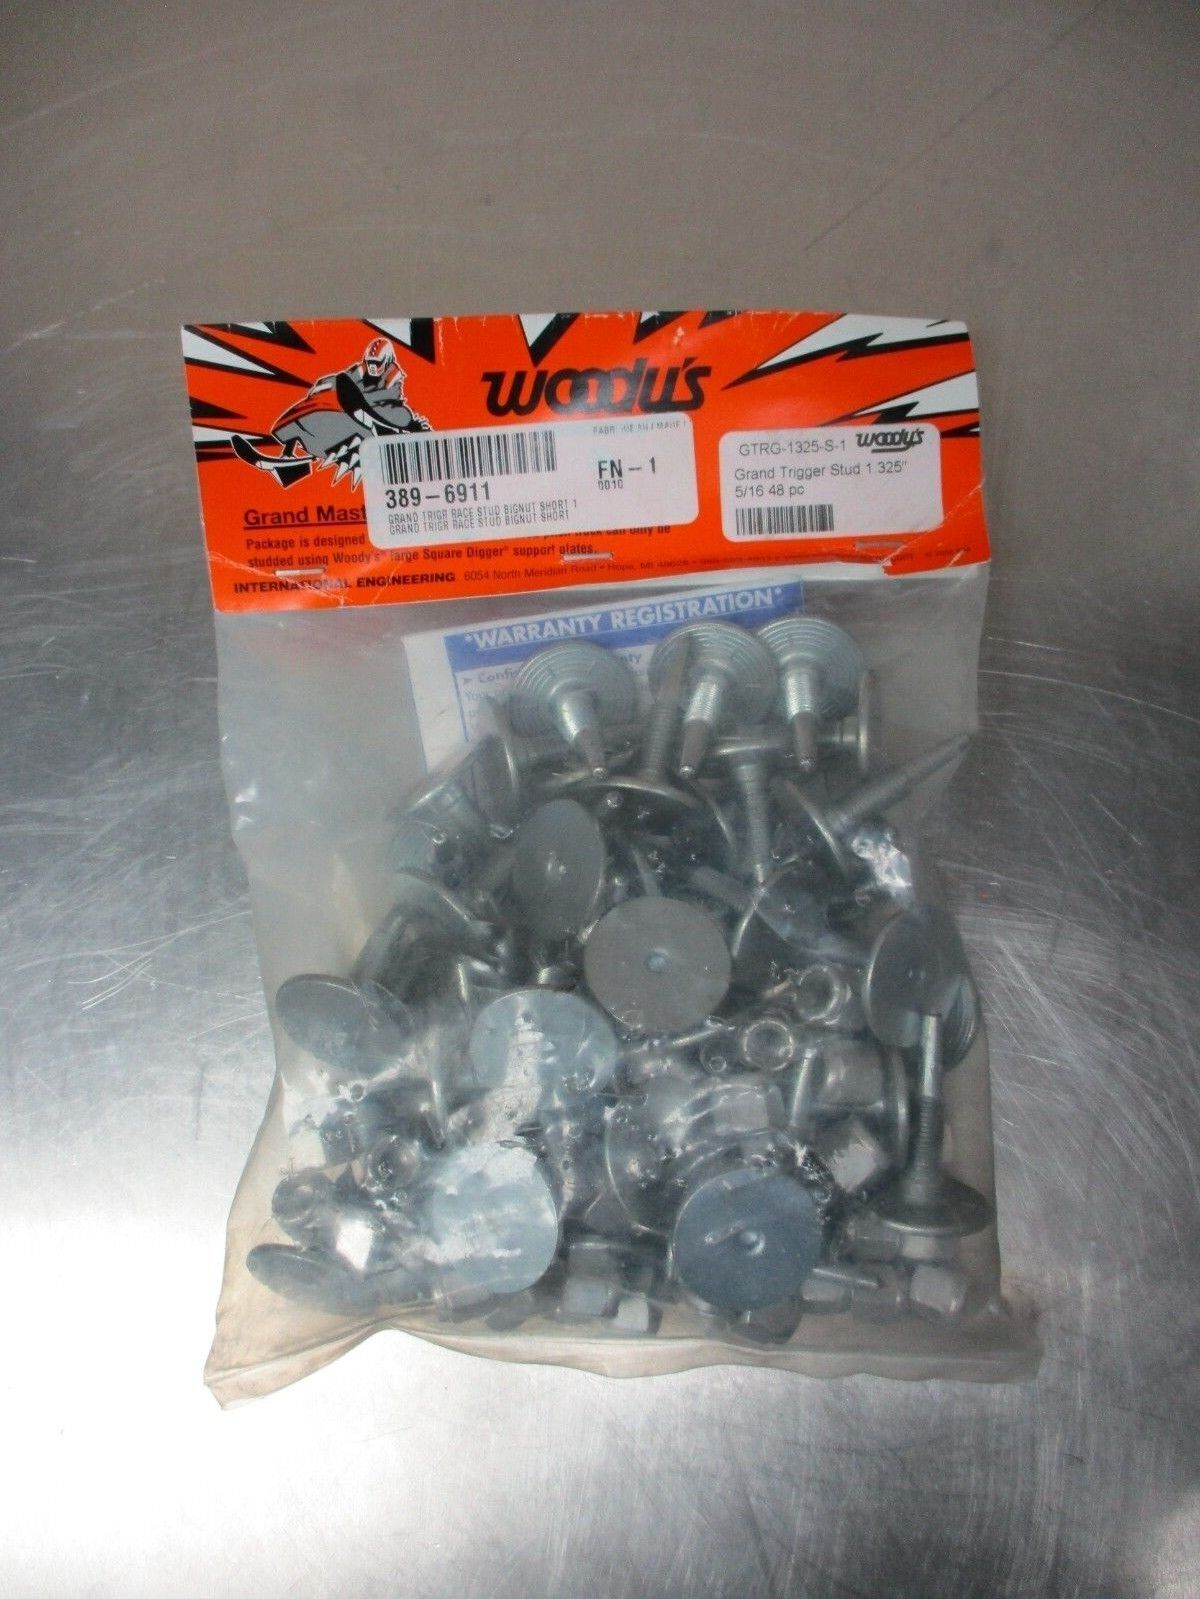 Woody's Grand Trigger Stud 1.325" 5/16 48pc kit GTRG-1325-S-1